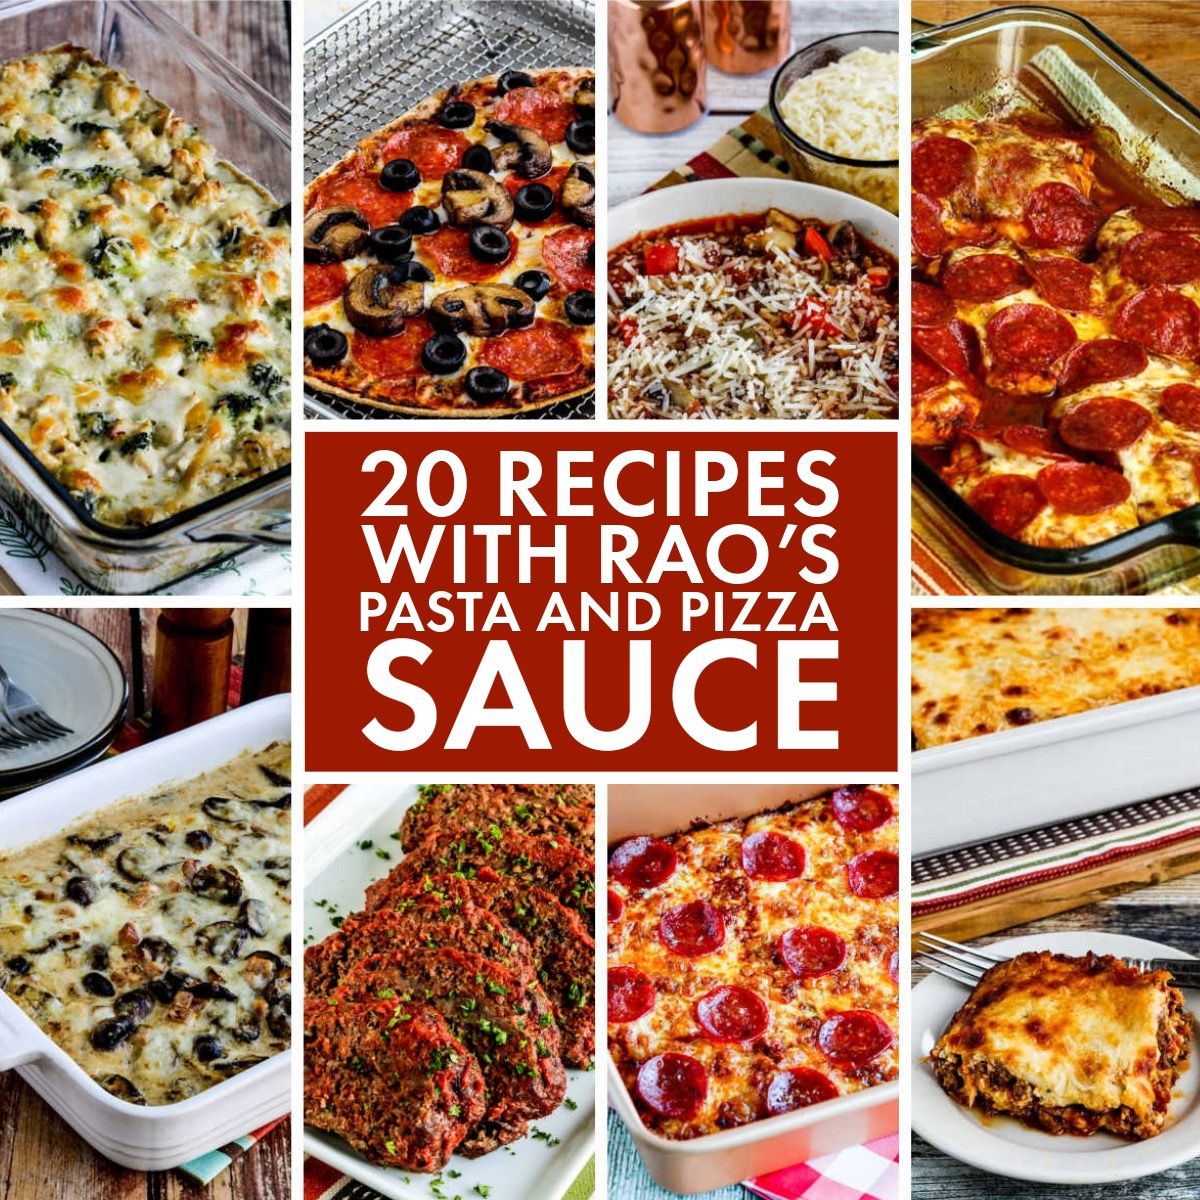 20 Recipes with Rao's Pasta and Pizza Sauce collage of featured recipes.